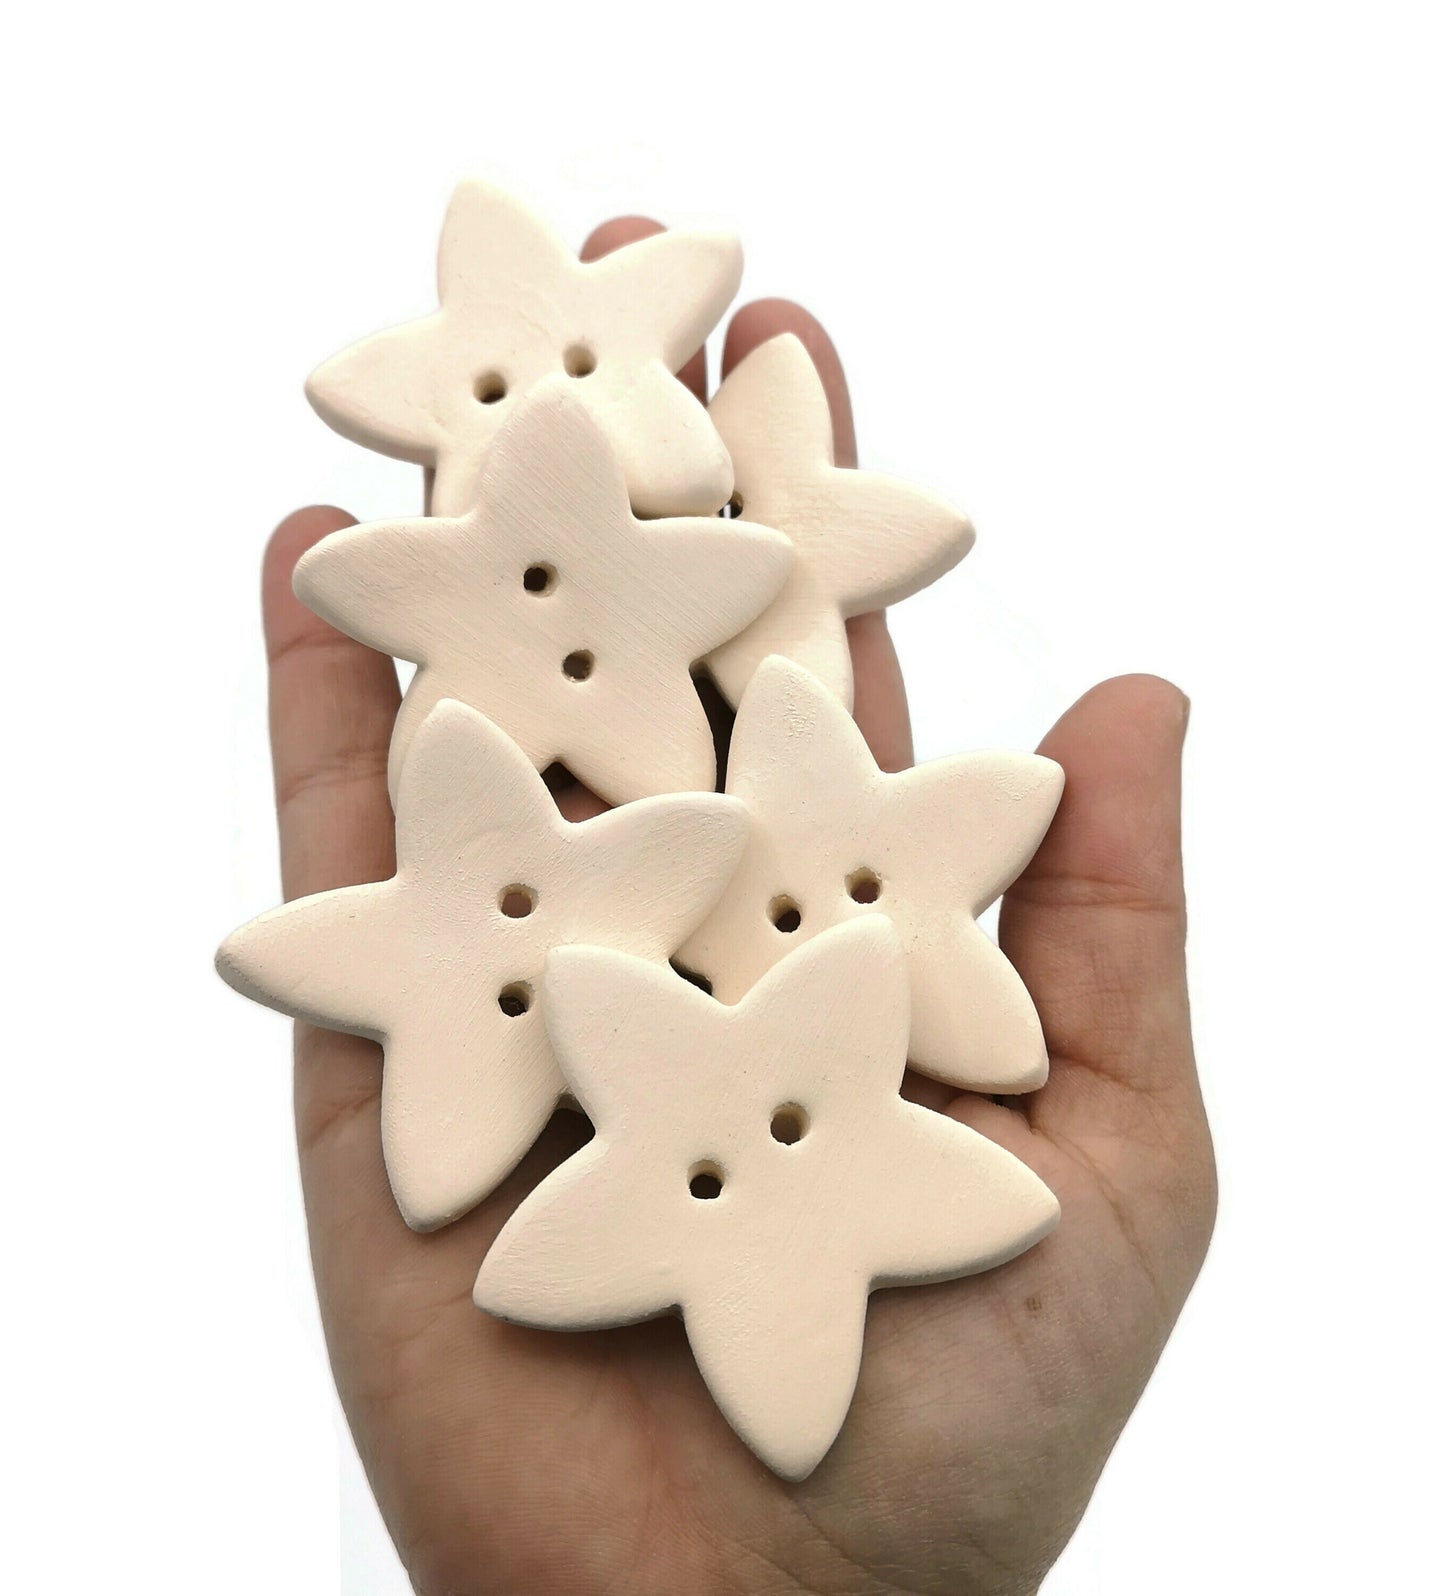 Blank Star Sewing Buttons, Unpainted Handmade Ceramic Bisque Ready To Paint, best sellers celestial buttons for favors ornaments - Ceramica Ana Rafael